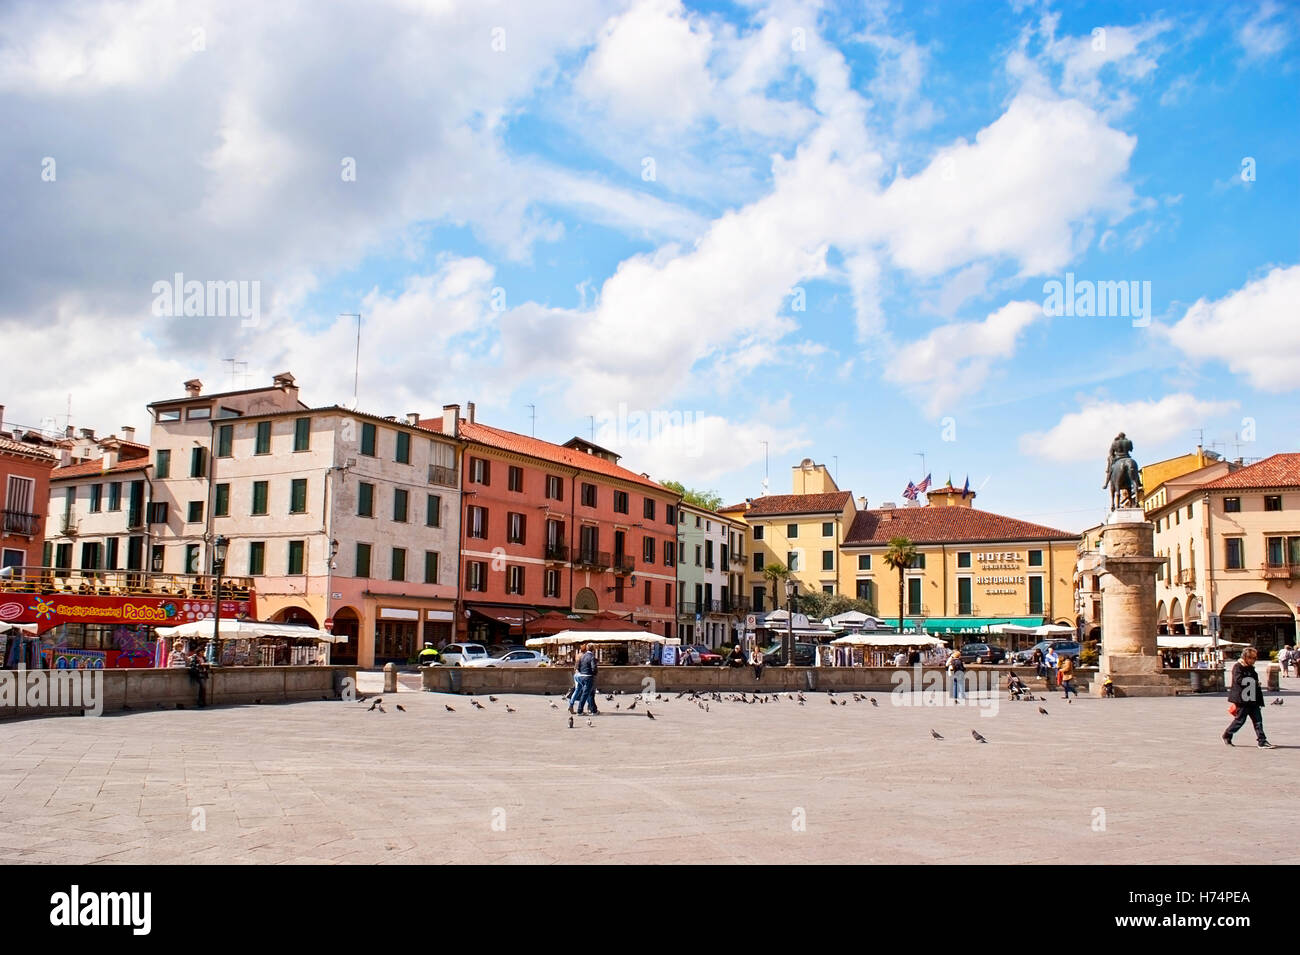 Piazza del Santo is the busy square, full of shops, cafes and hotels, with equestrian statue of Gattamelata by Donatello Stock Photo